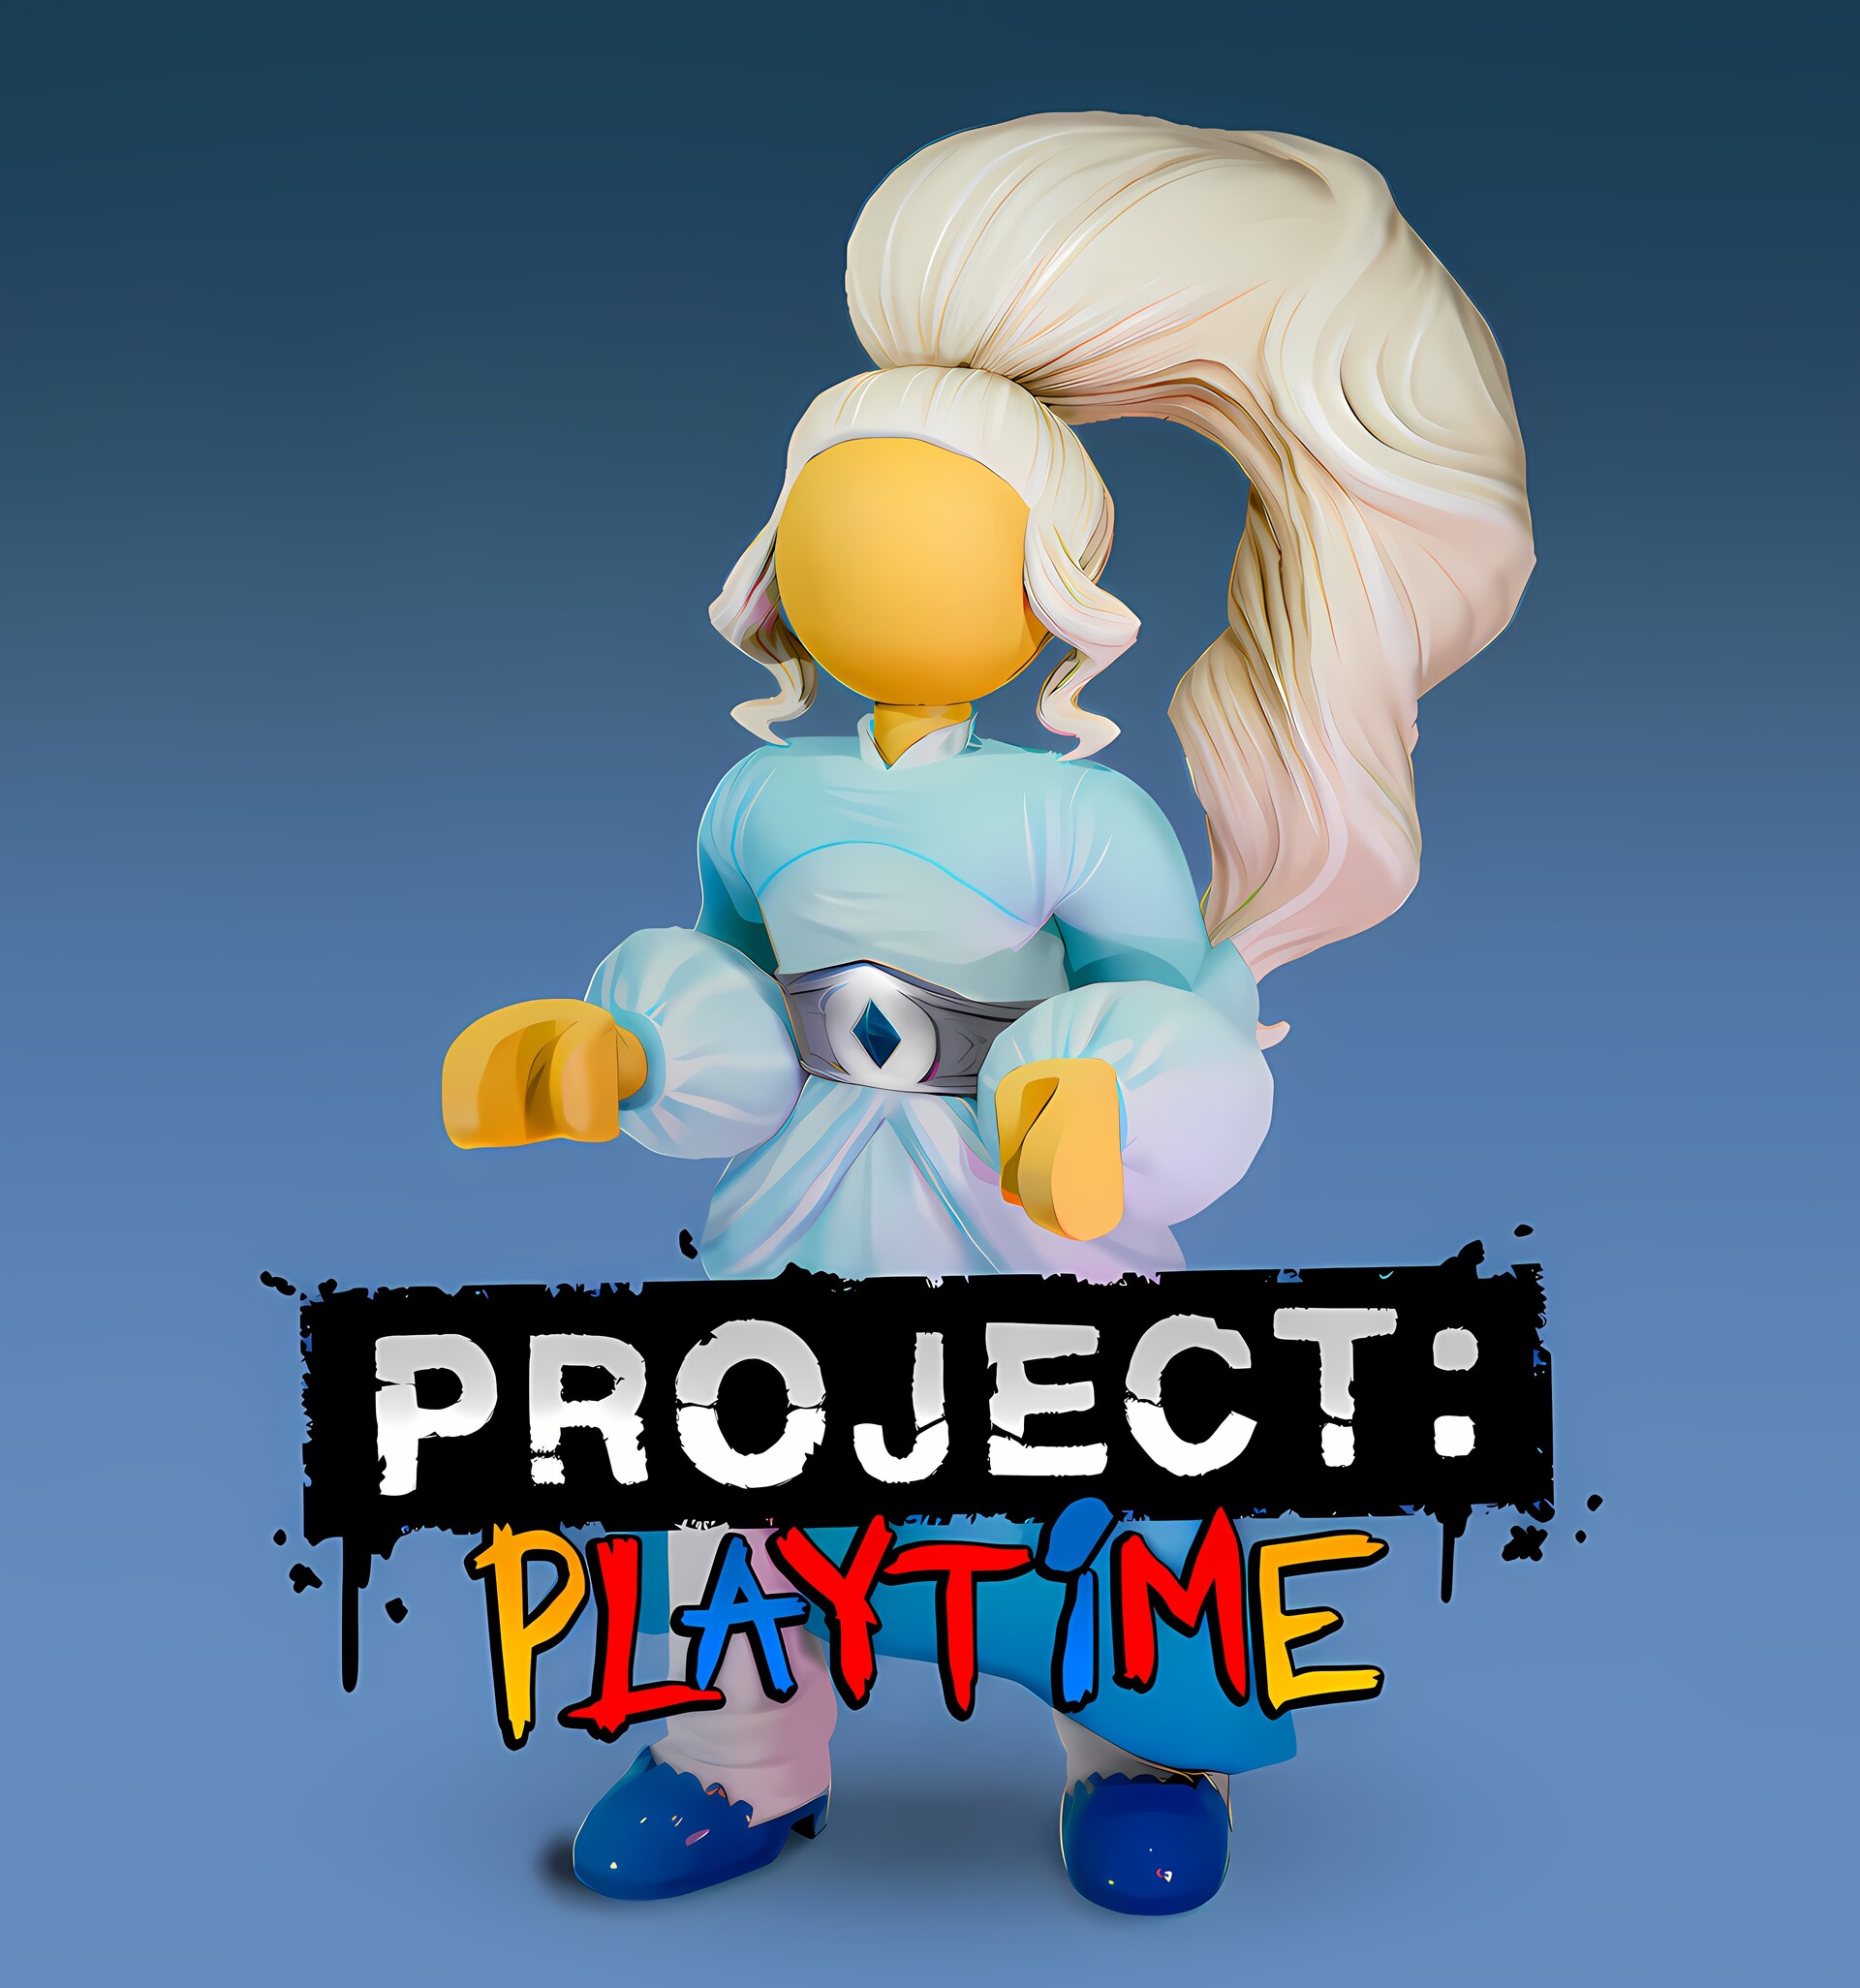 Pro Poppy Playtime Player, but.. COMPLETE EDITION